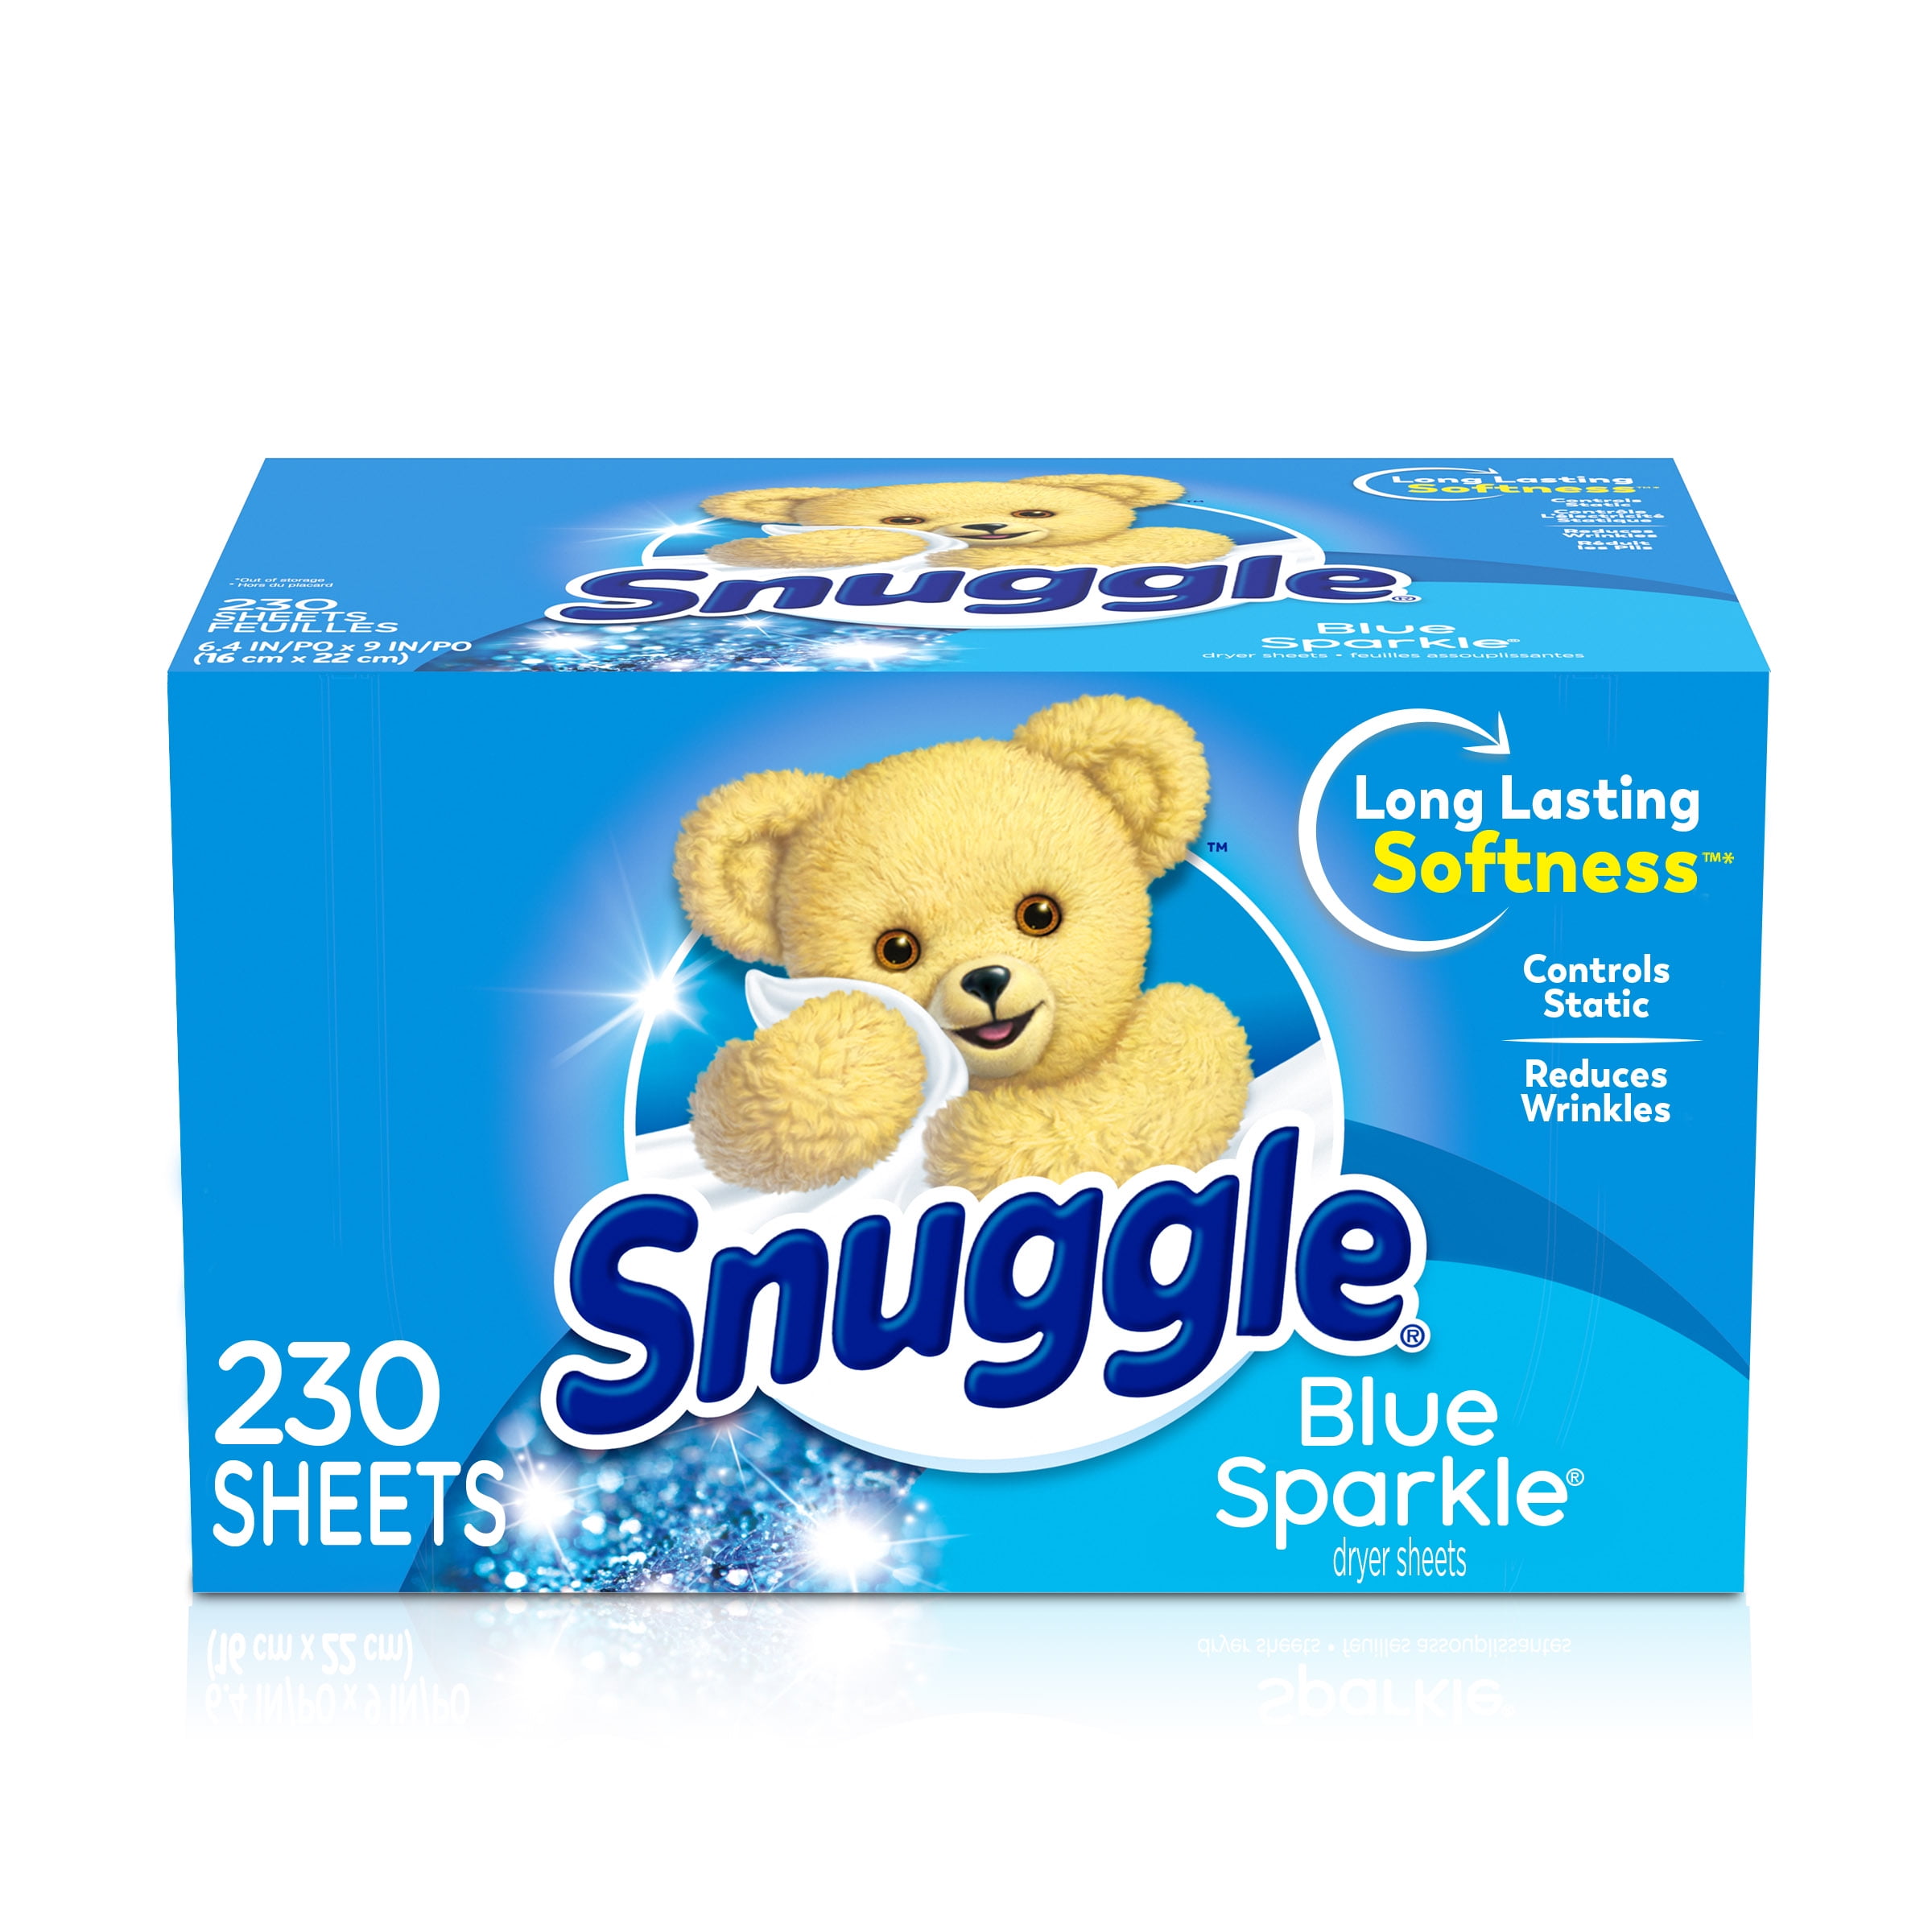 Lot of 4 Boxes Snuggle Fabric Softener 200 Dryer Sheets Each Box Blue Sparkle 